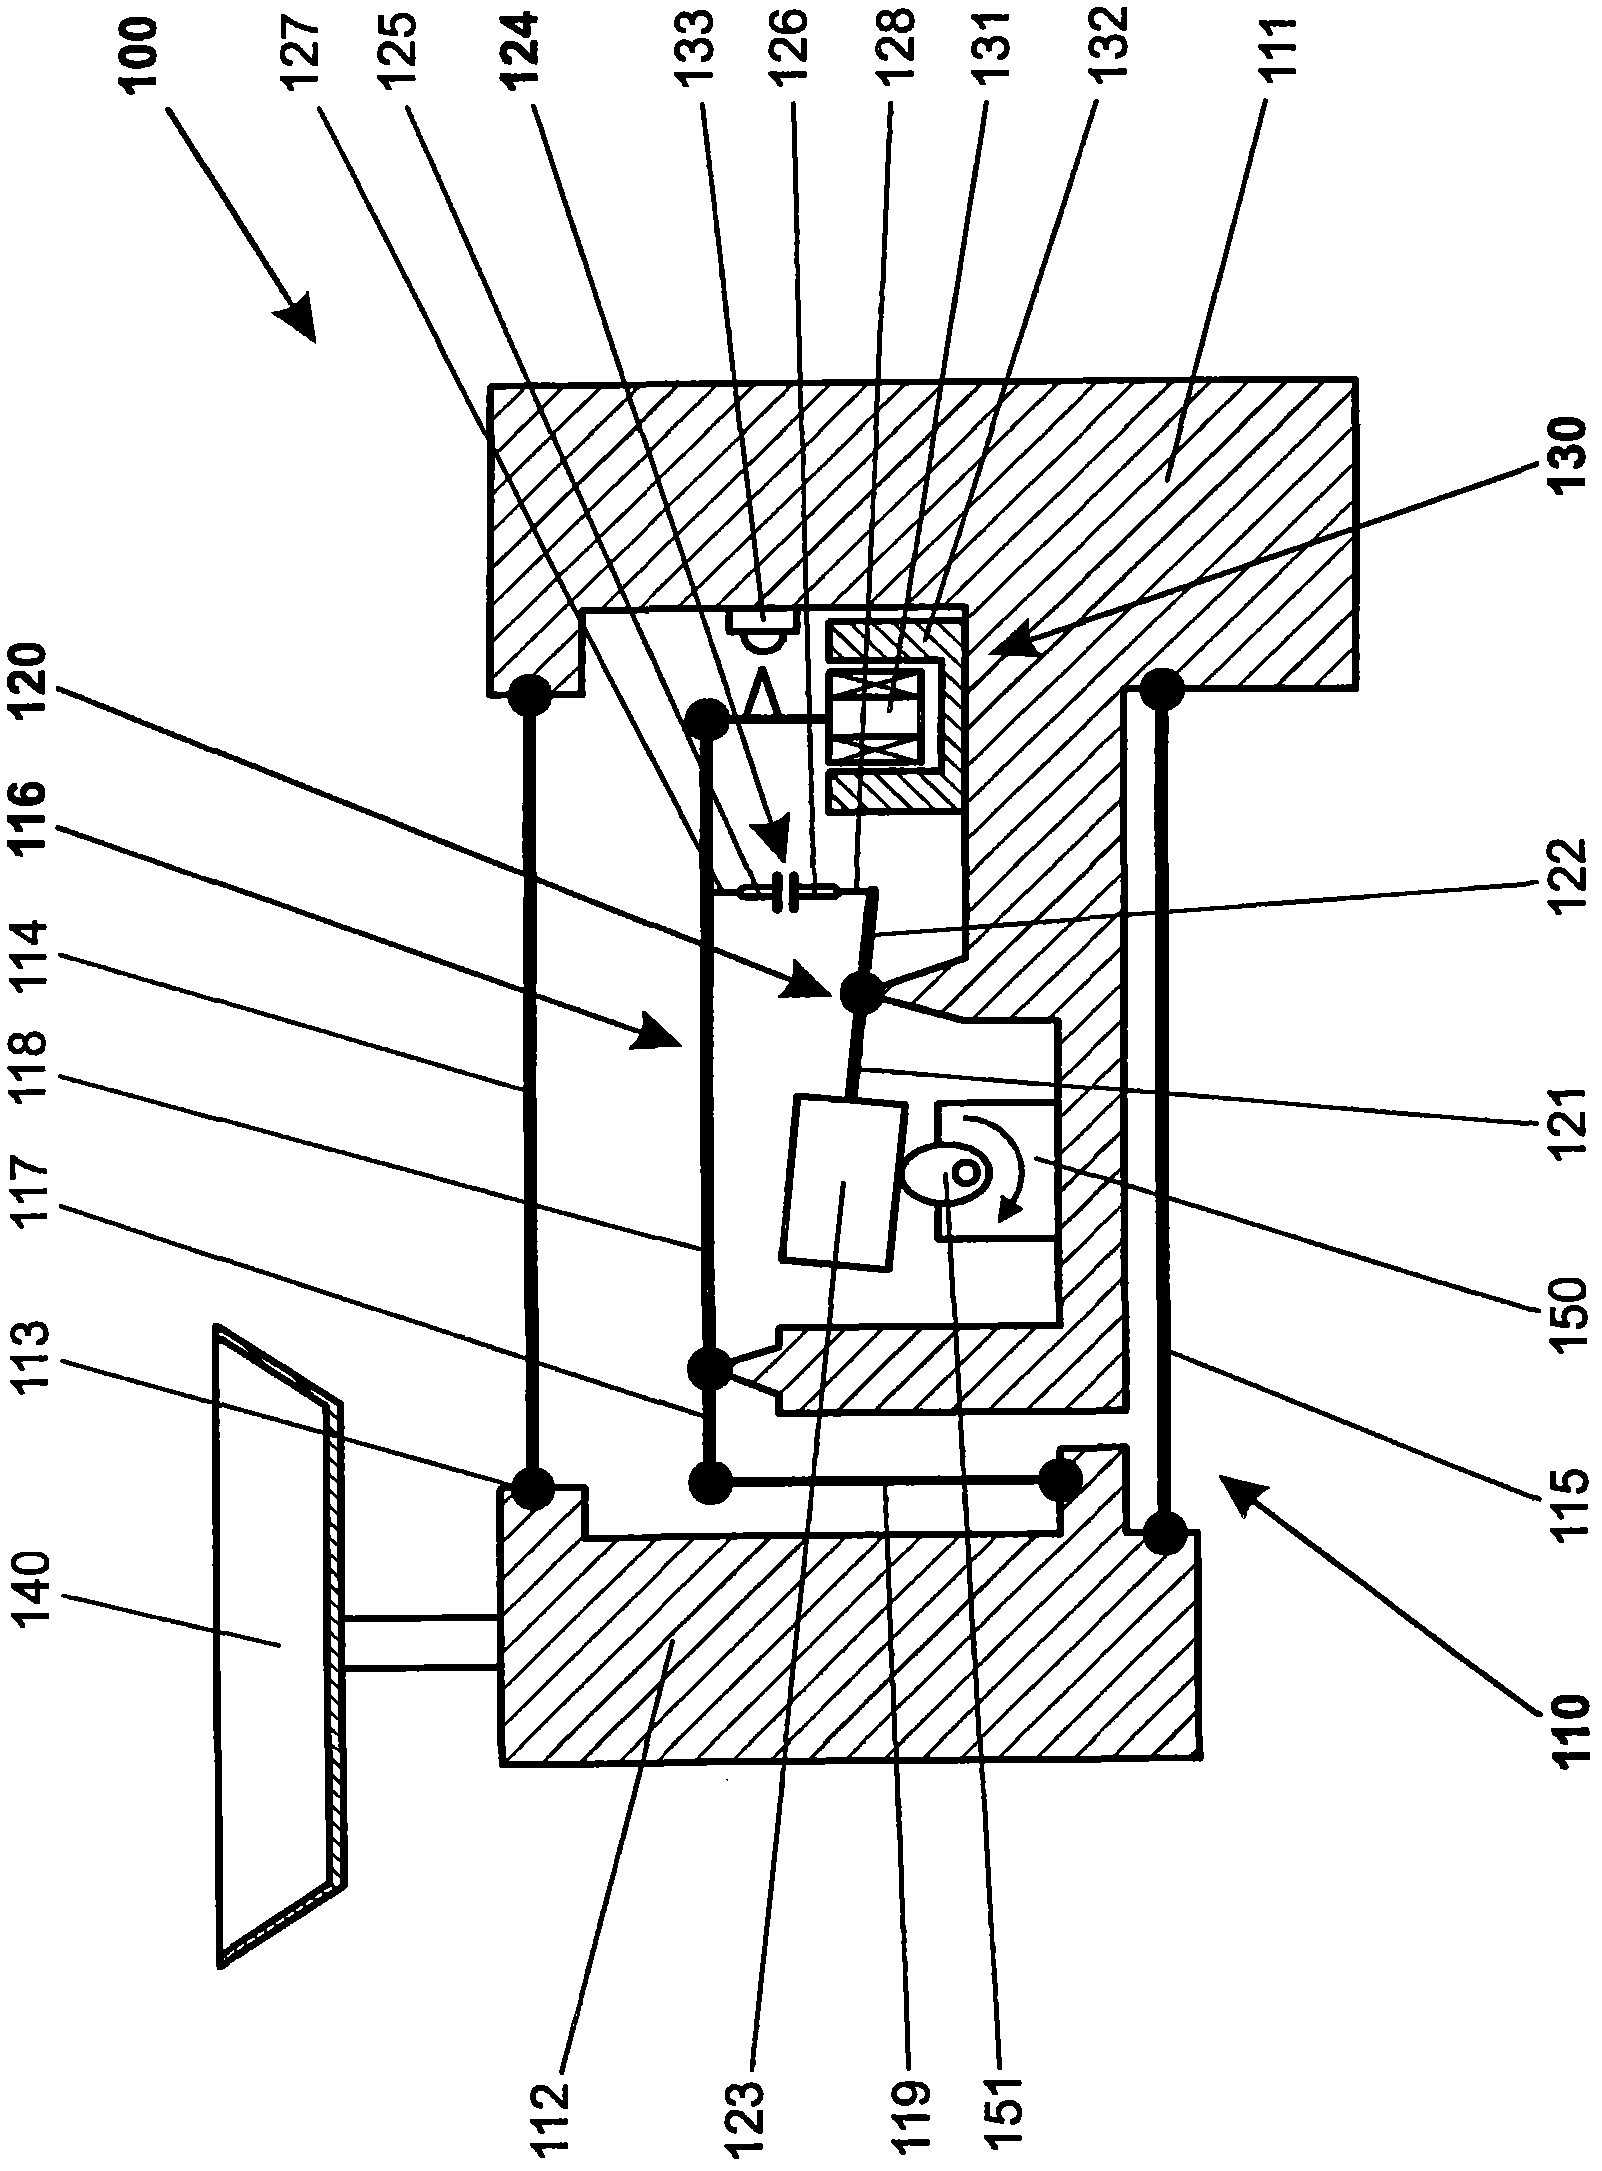 Force-transmitting device with a calibration weight that can be coupled and uncoupled